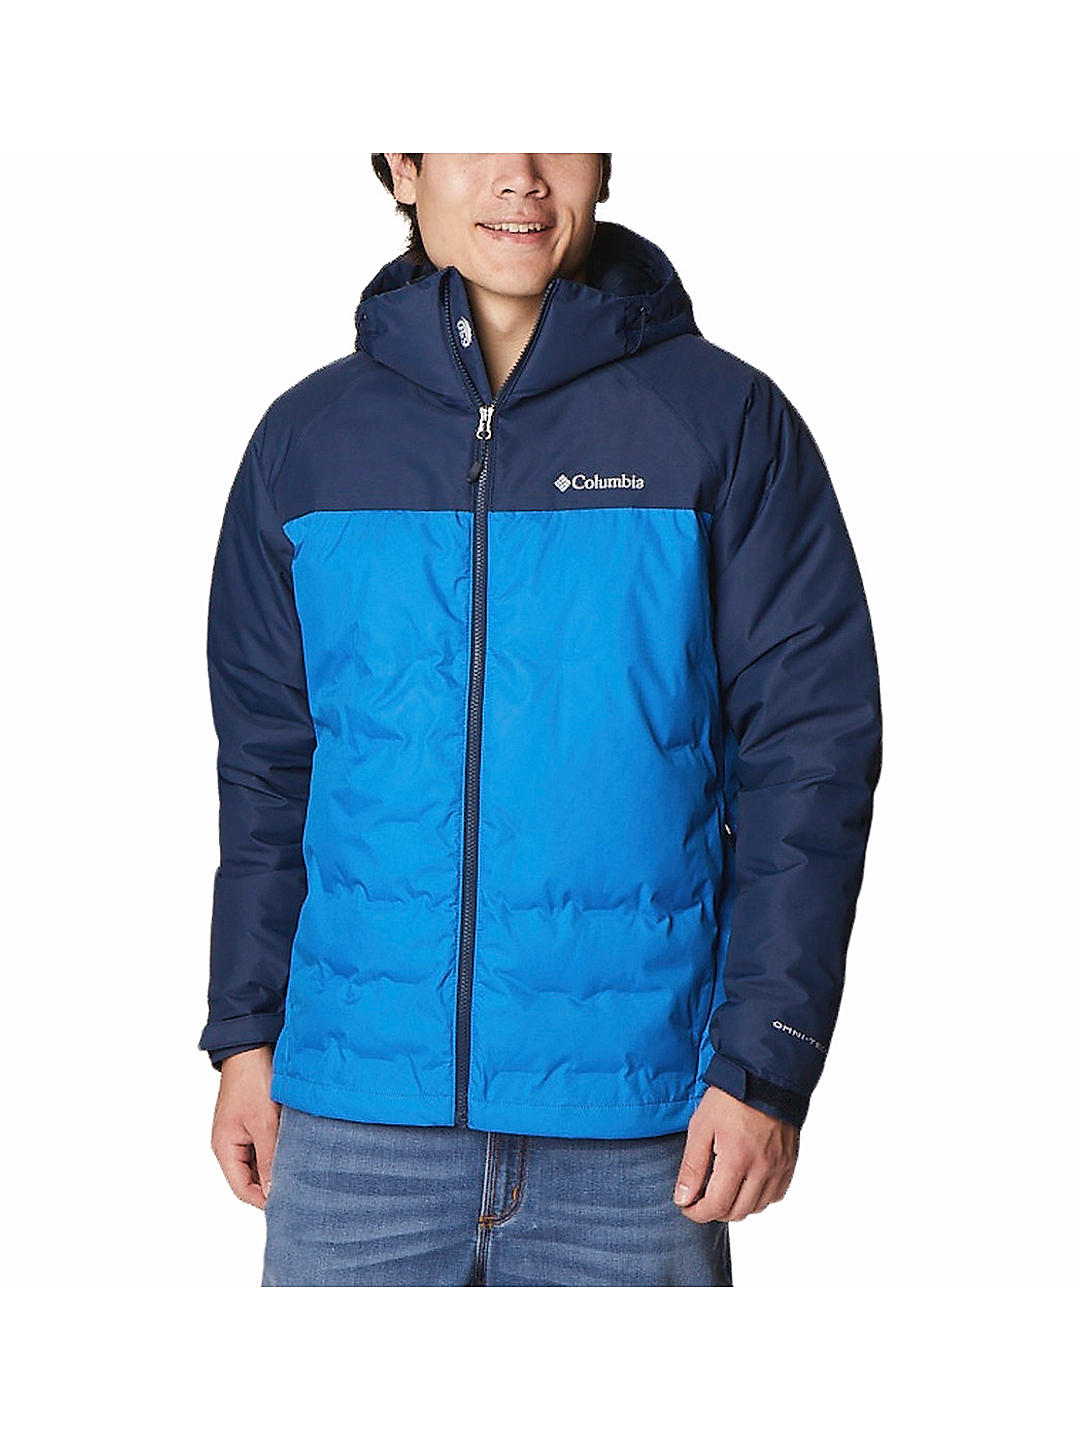 Buy Columbia Sportswear Products for Men and Women Online at Adventuras